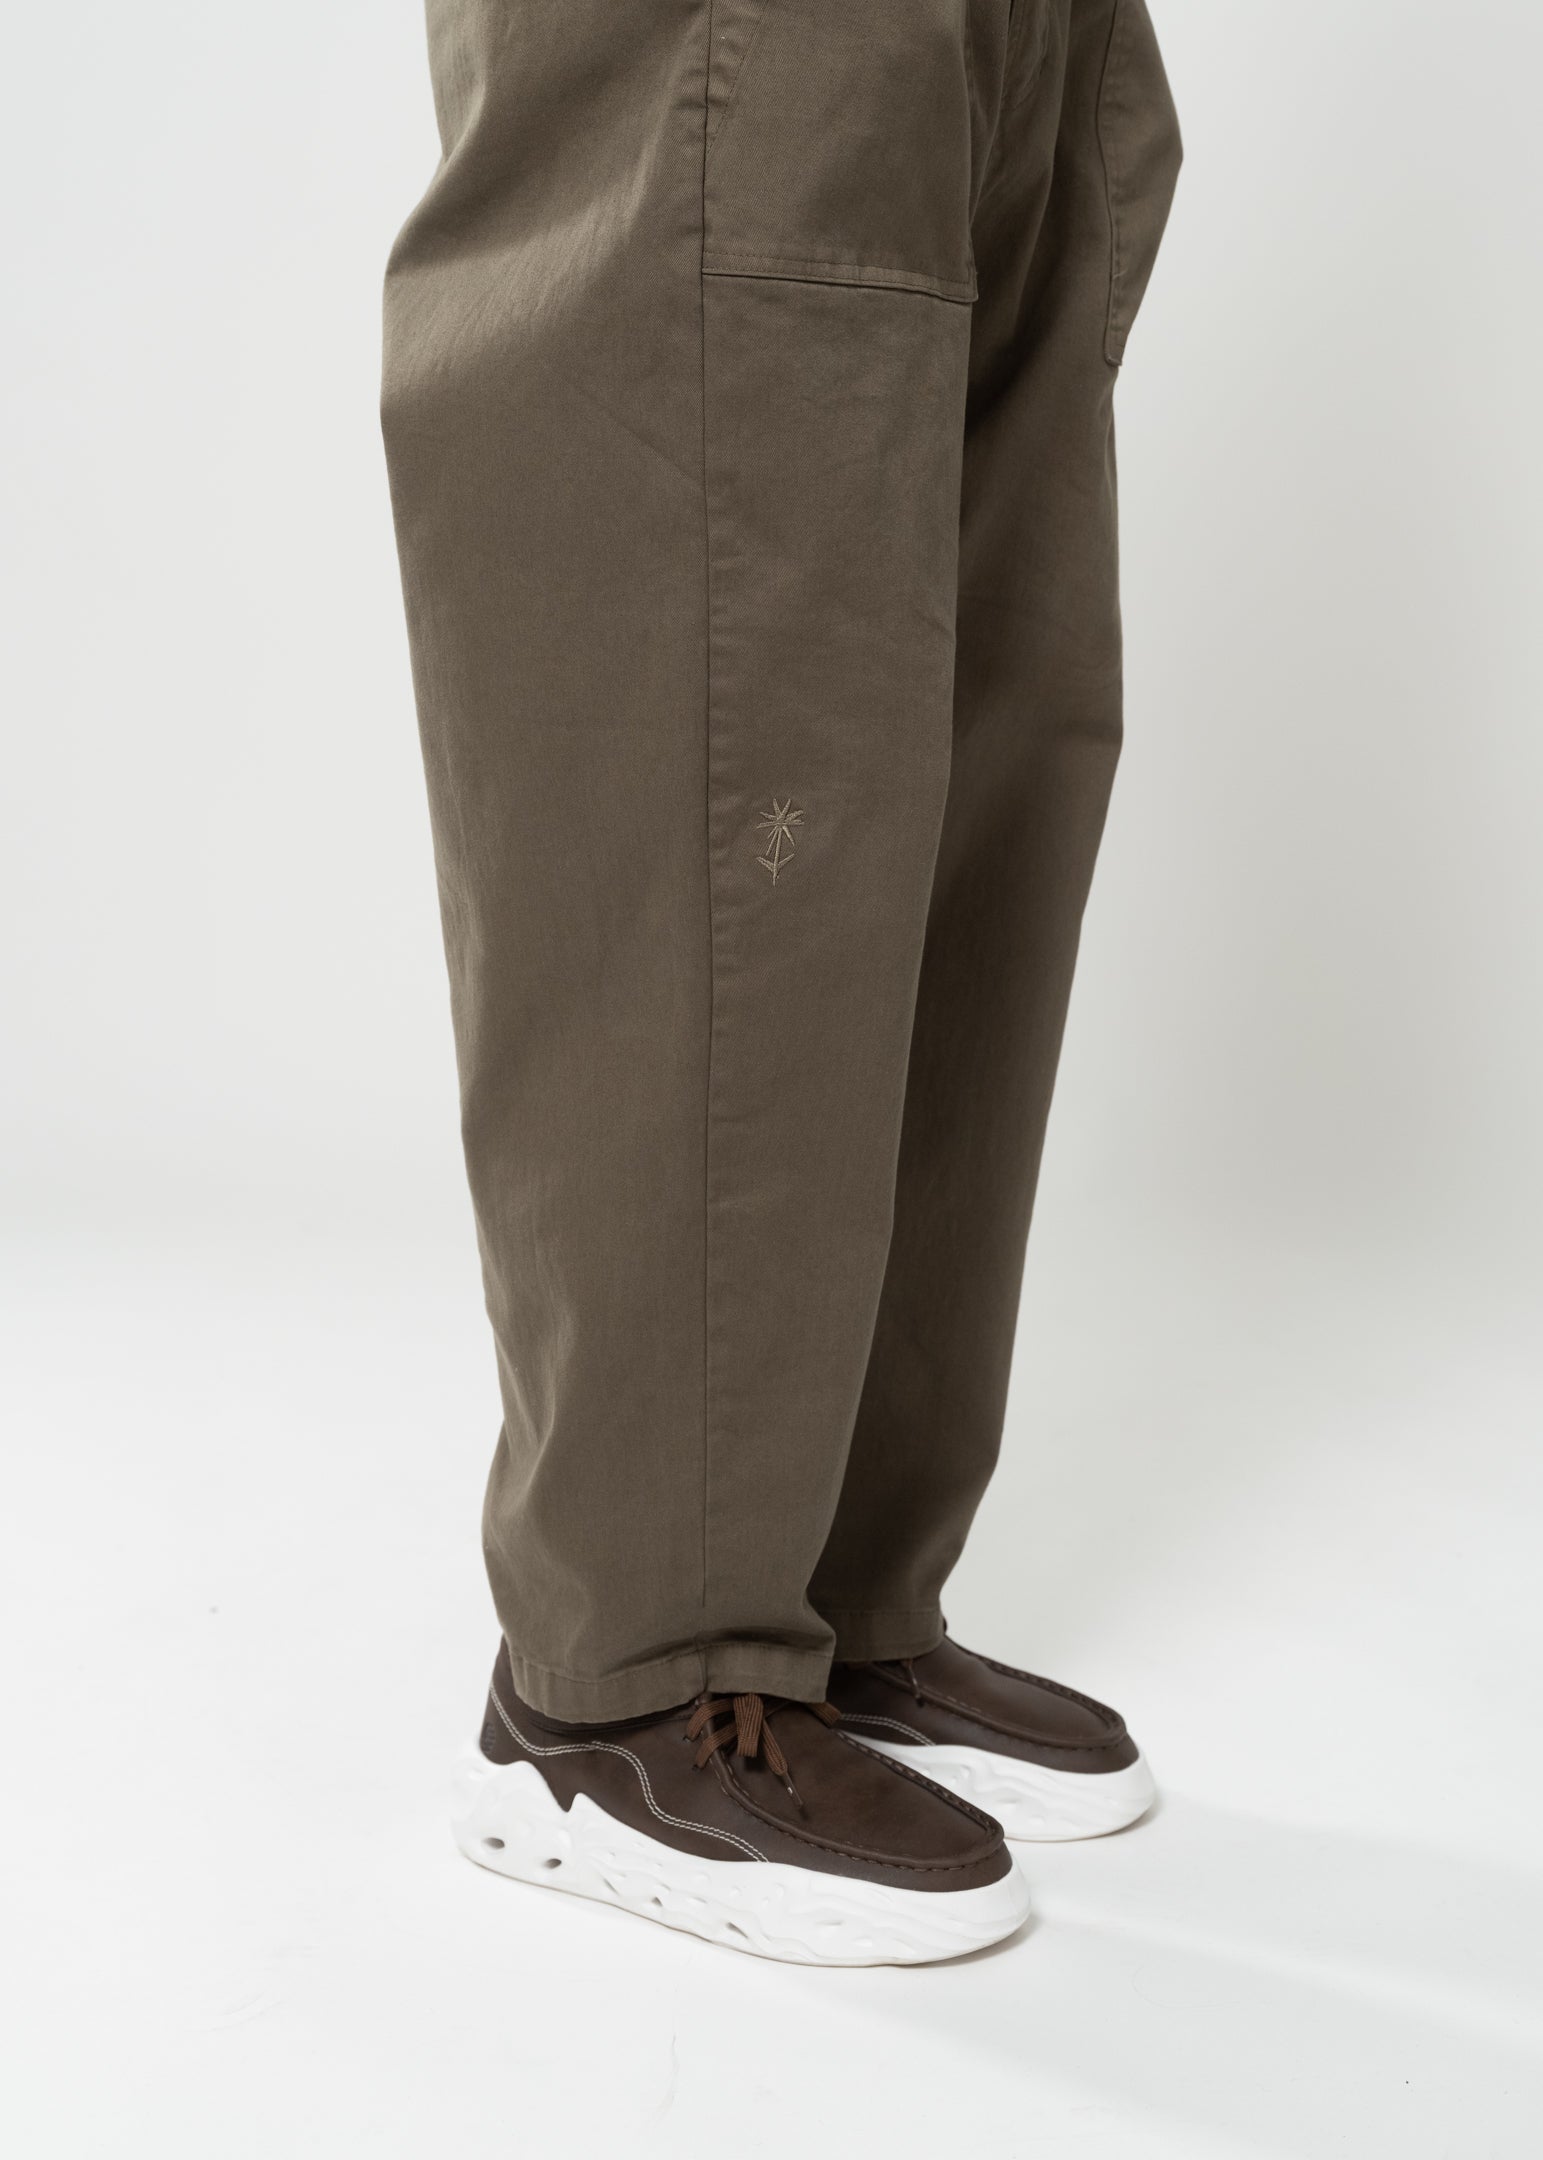 Flowers for Society chino pant olive sideview worn by model standing